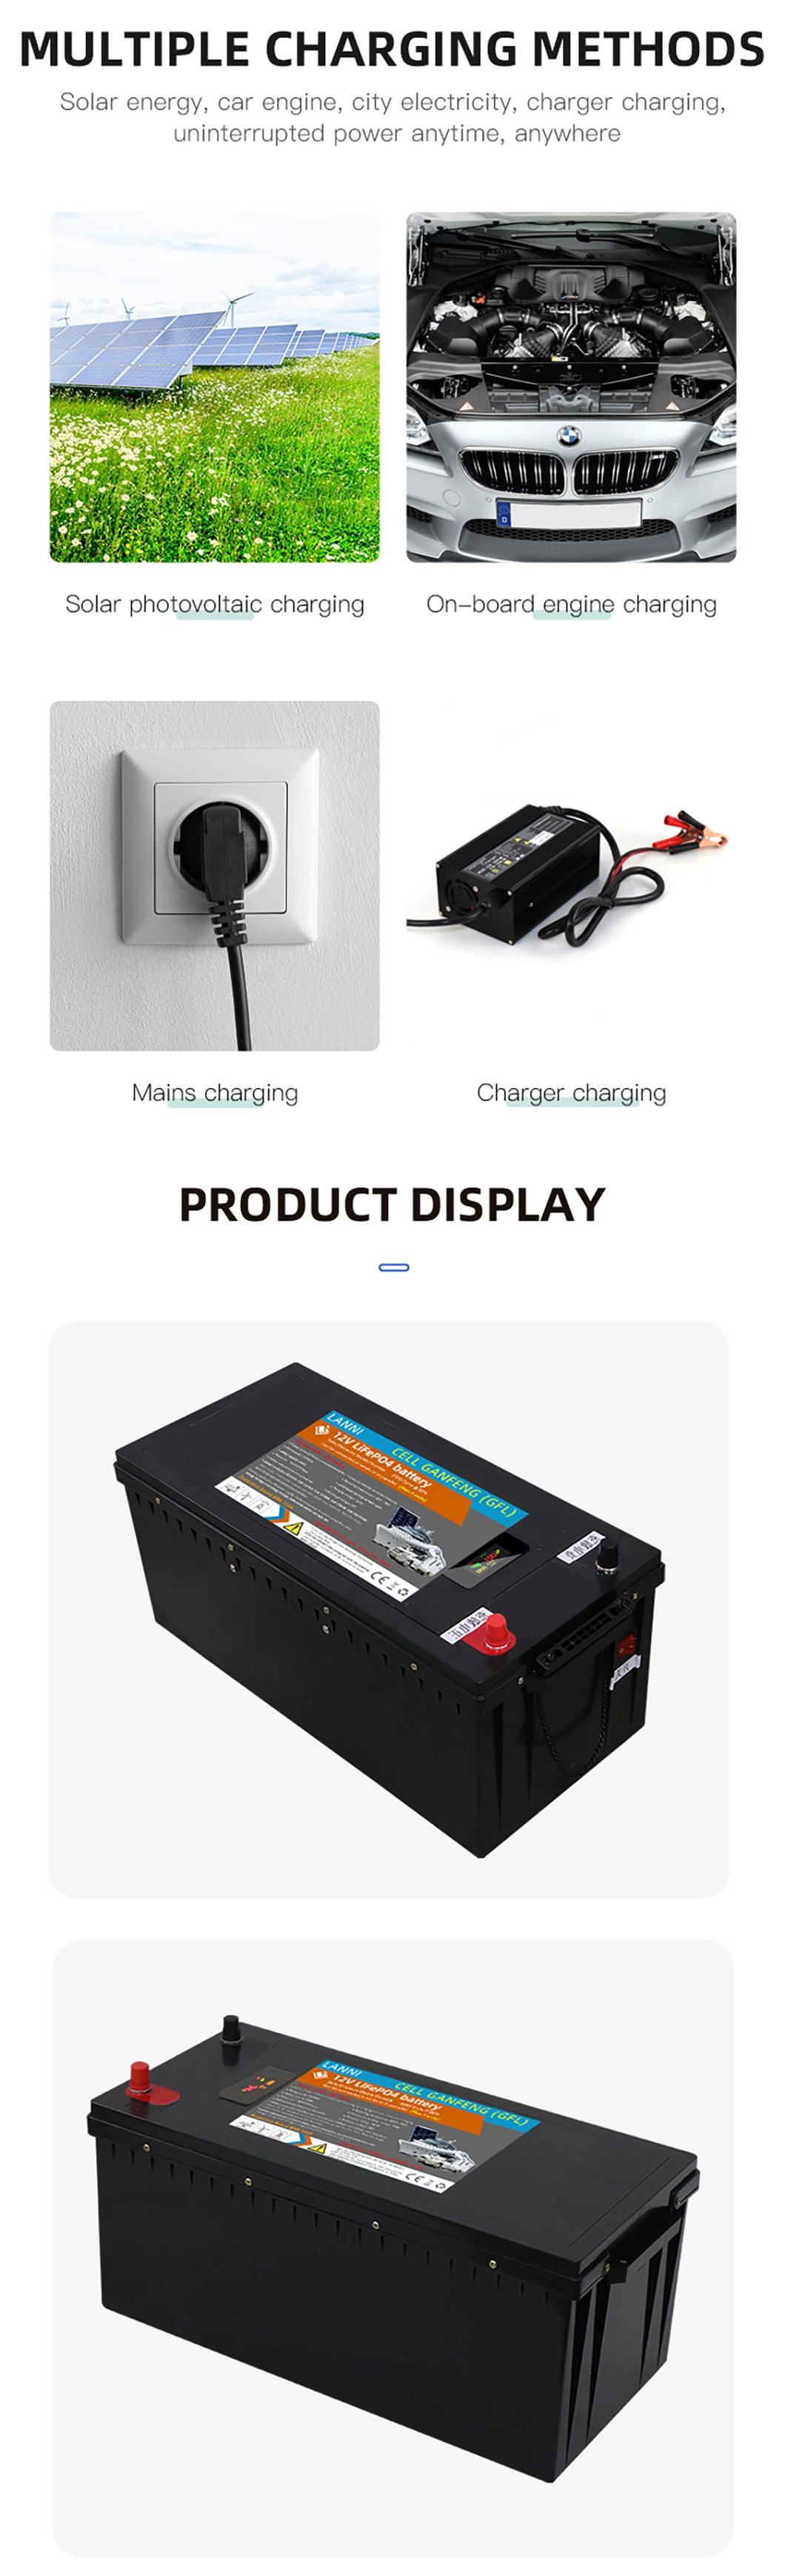 60A Charge Controller 1800mAh Battery 12V 24V 36V 48V Capable with DC to DC Battery Charger Solar Panel and Lithium Battery